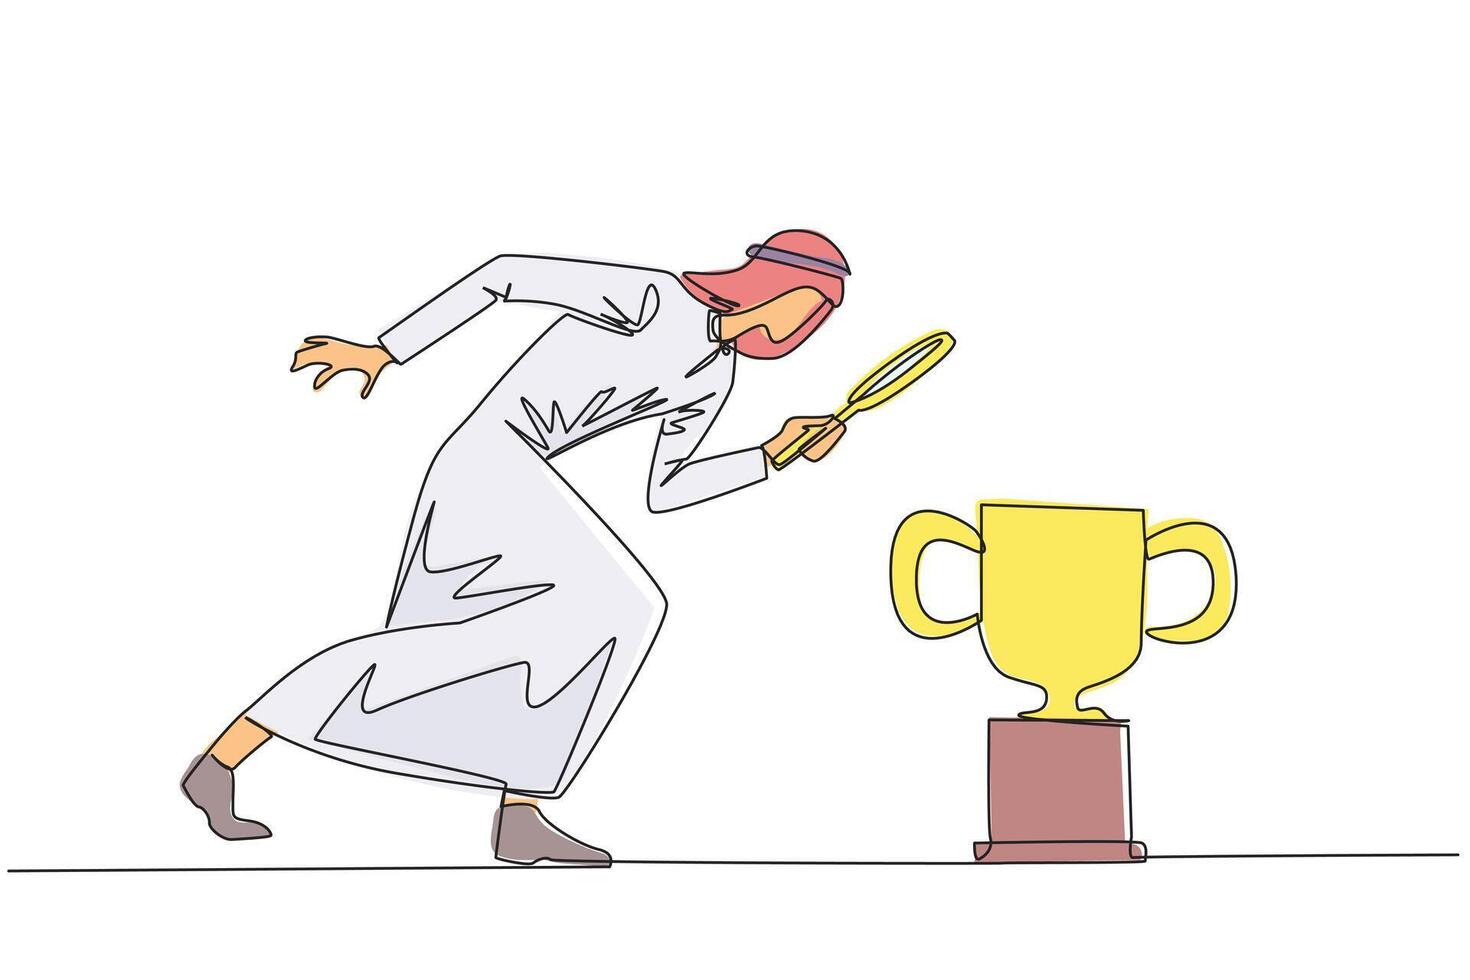 Single continuous line drawing of Arabian businessman holding magnifying glass looking at trophy. Long journey of running a business pays off by finding trophy as reward. One line illustration vector